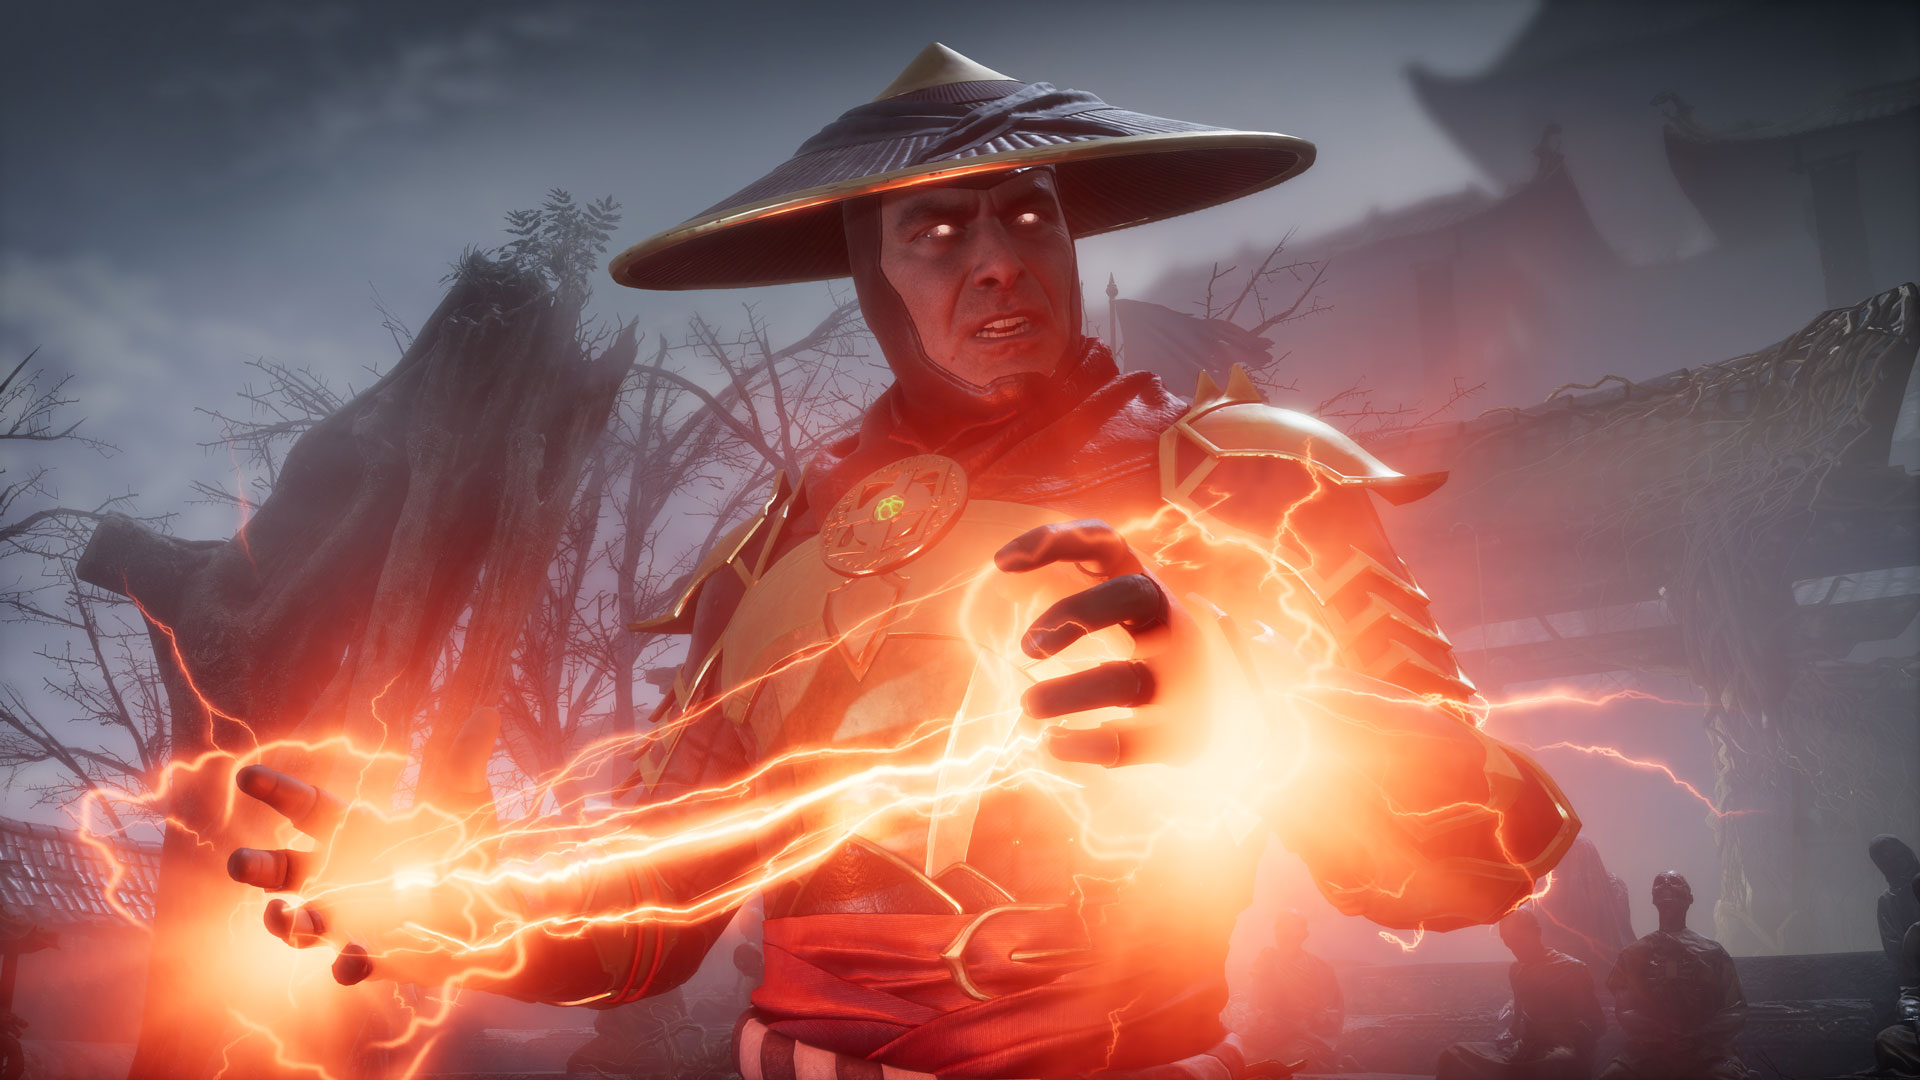  New Mortal Kombat game teased, movie sequel confirmed, and creator Ed Boon gets a gong 